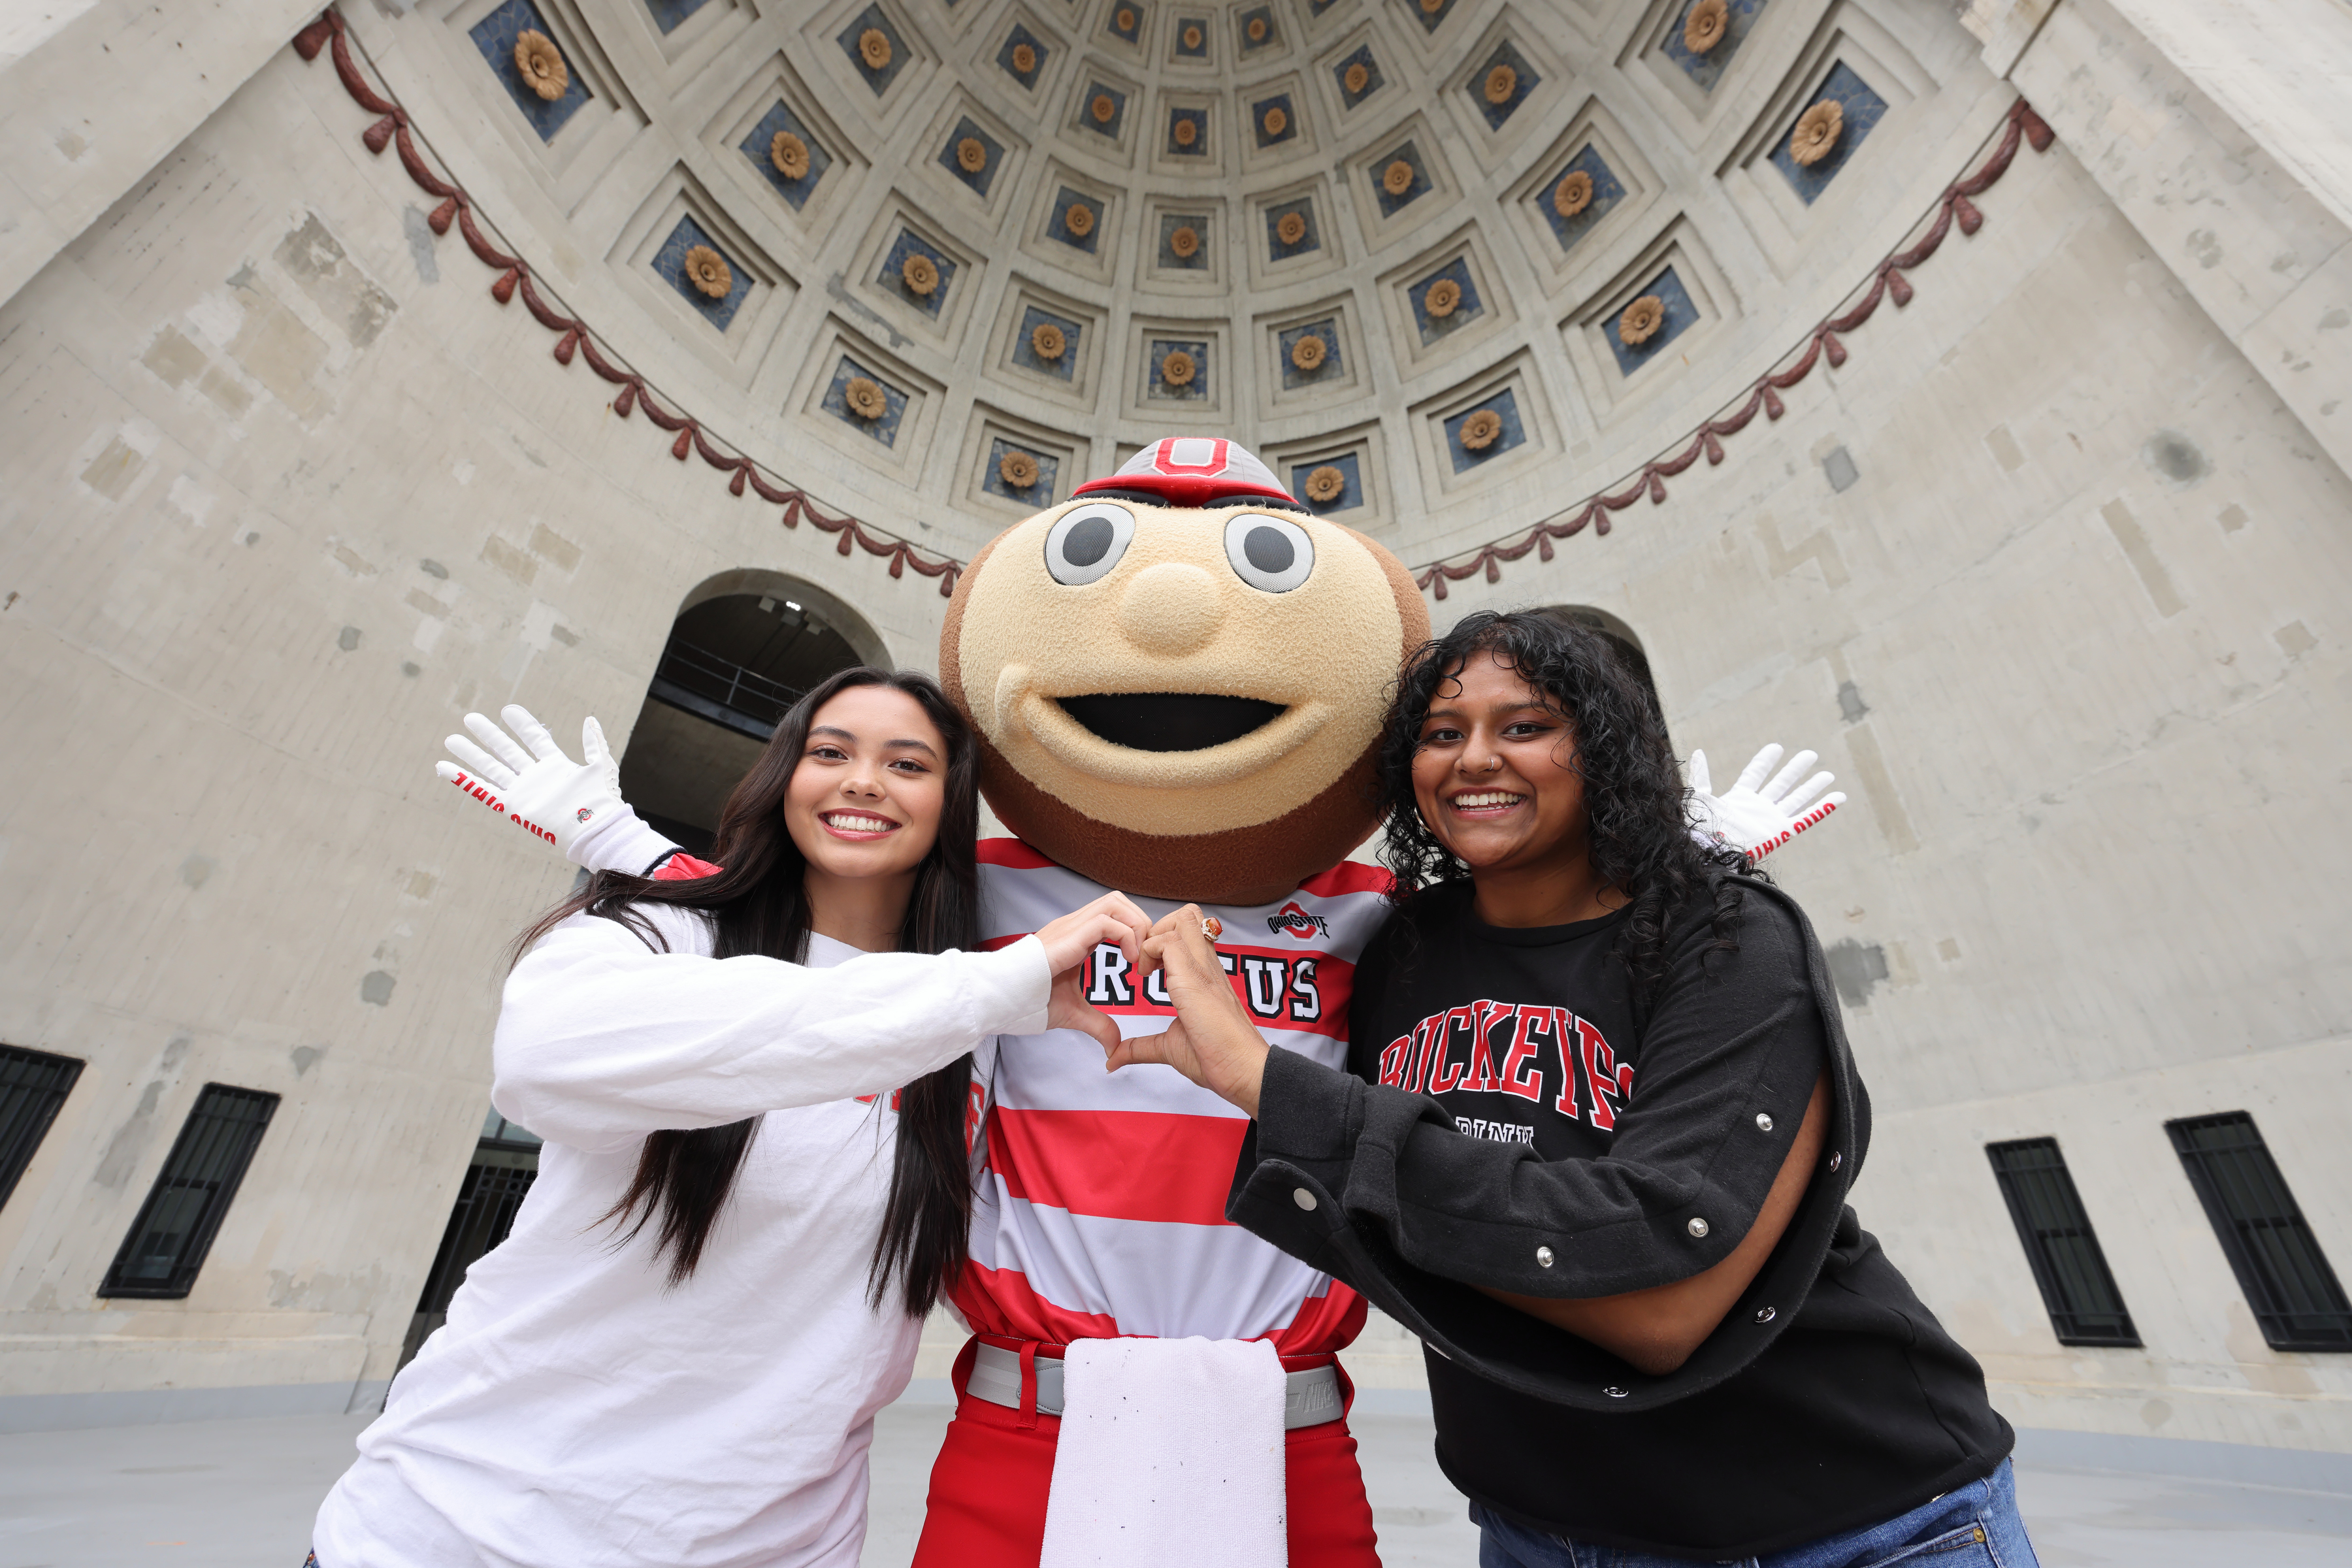 Two young people making a heart with their hands in front of the Brutus Mascot